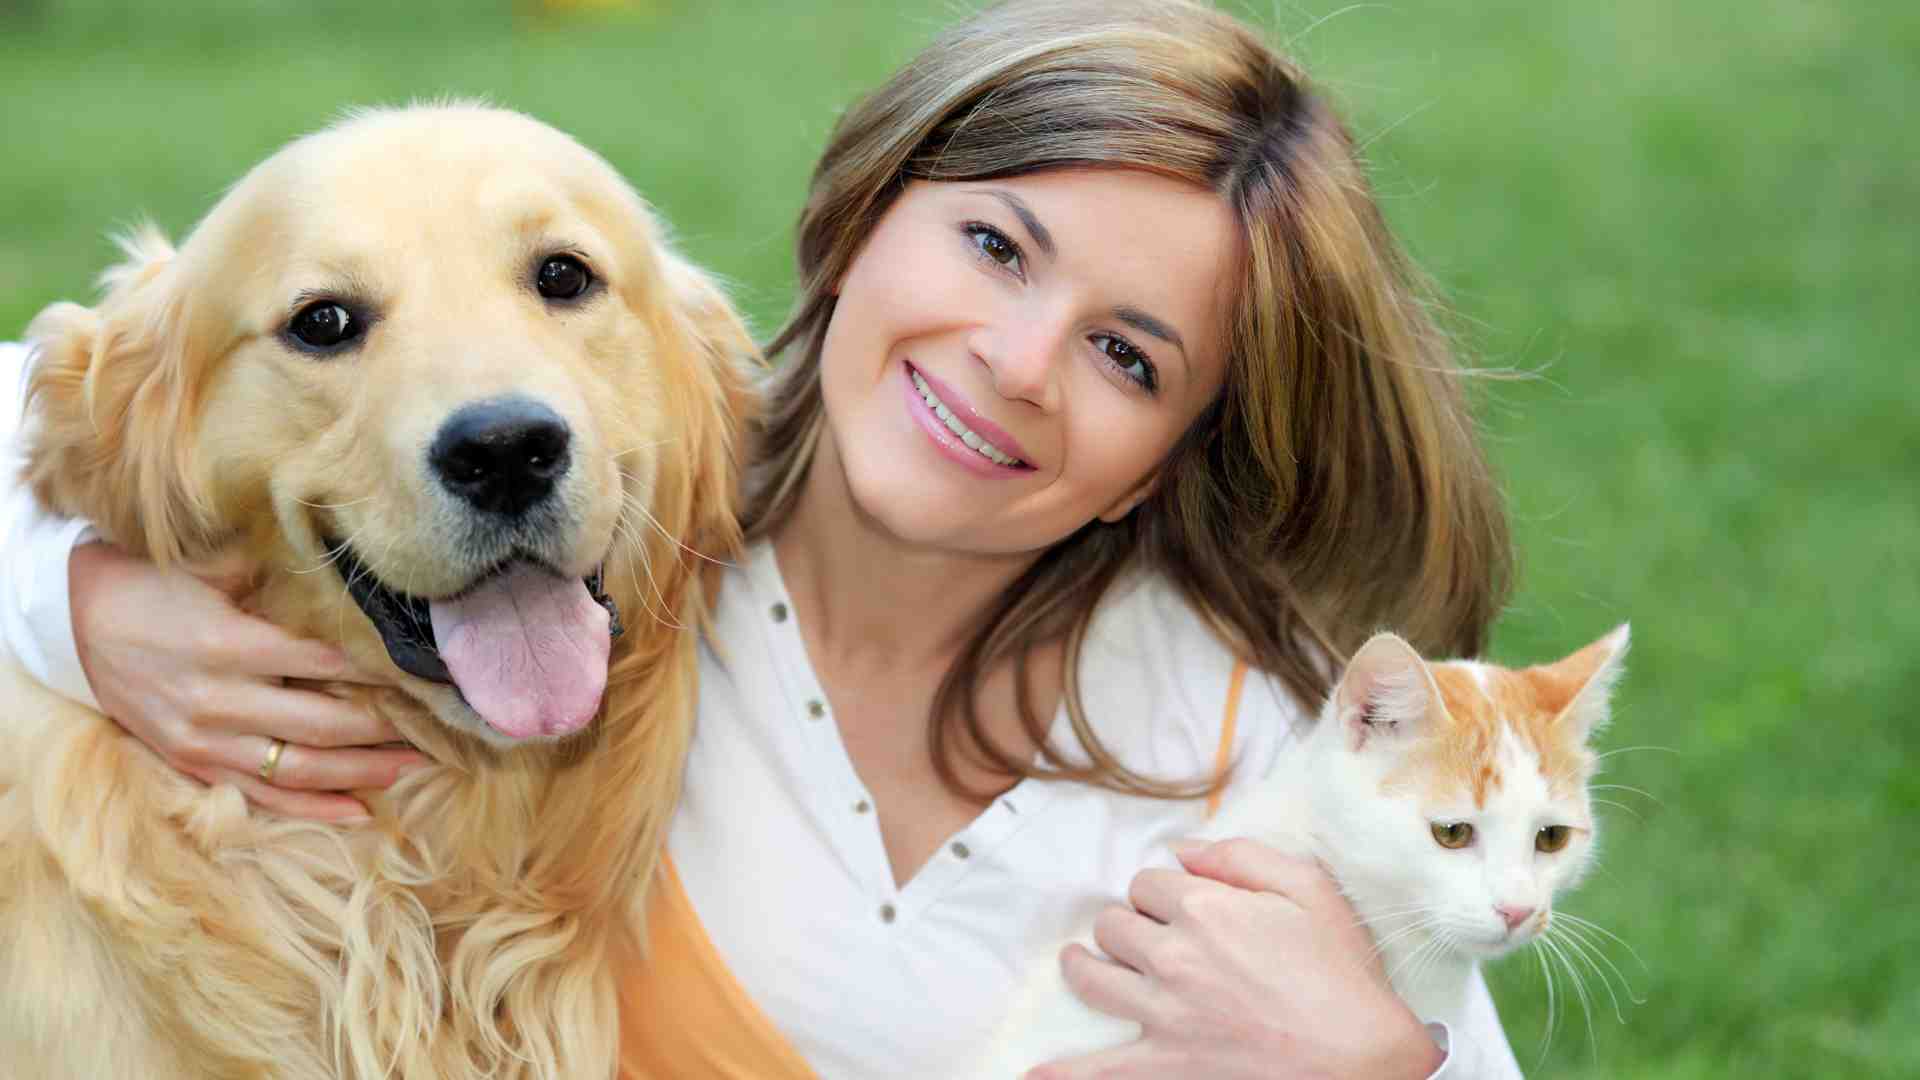 Creating a Pet Trust helps ensure your pet will be well cared for